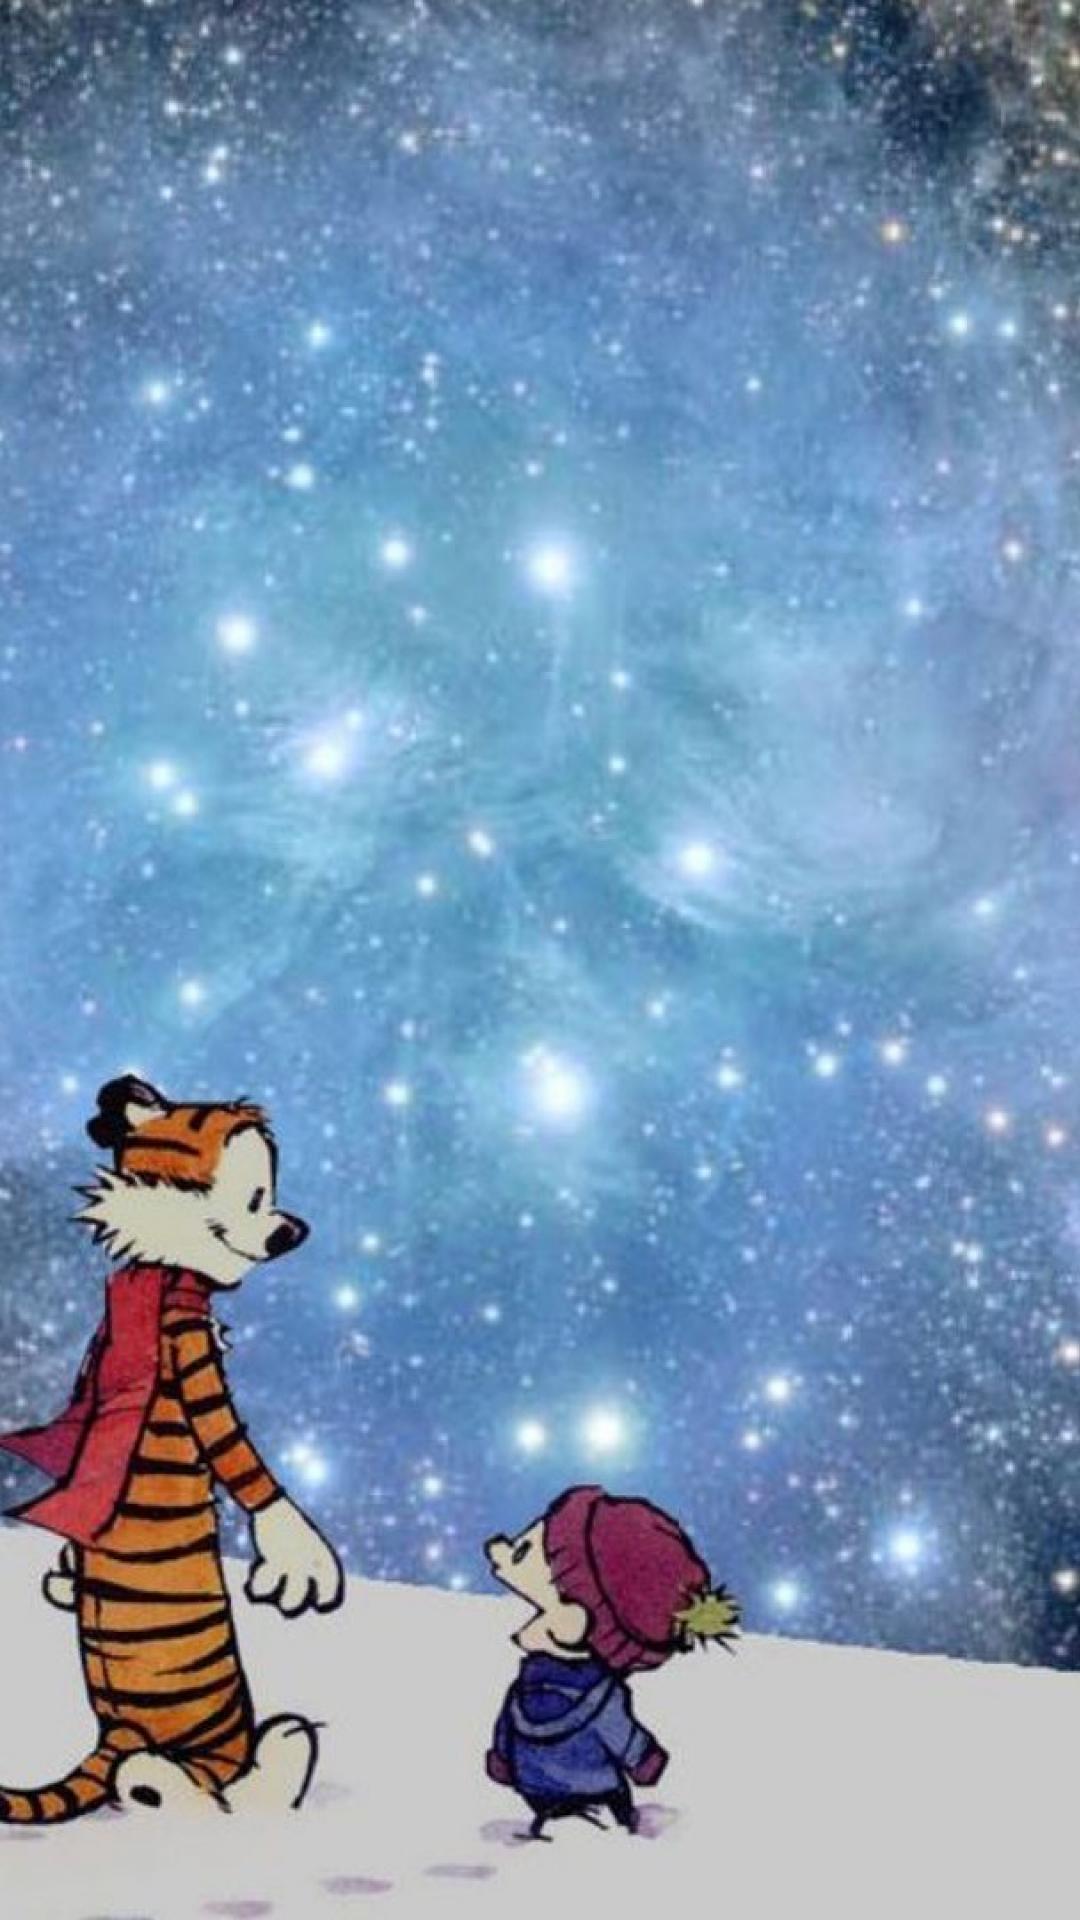 Featured image of post Calvin Hobbes Wallpaper Iphone Wallpapers net provides hand picked high quality 4k ultra hd desktop mobile wallpapers in various resolutions to suit your needs such as apple iphones macbooks windows pcs samsung phones google phones etc